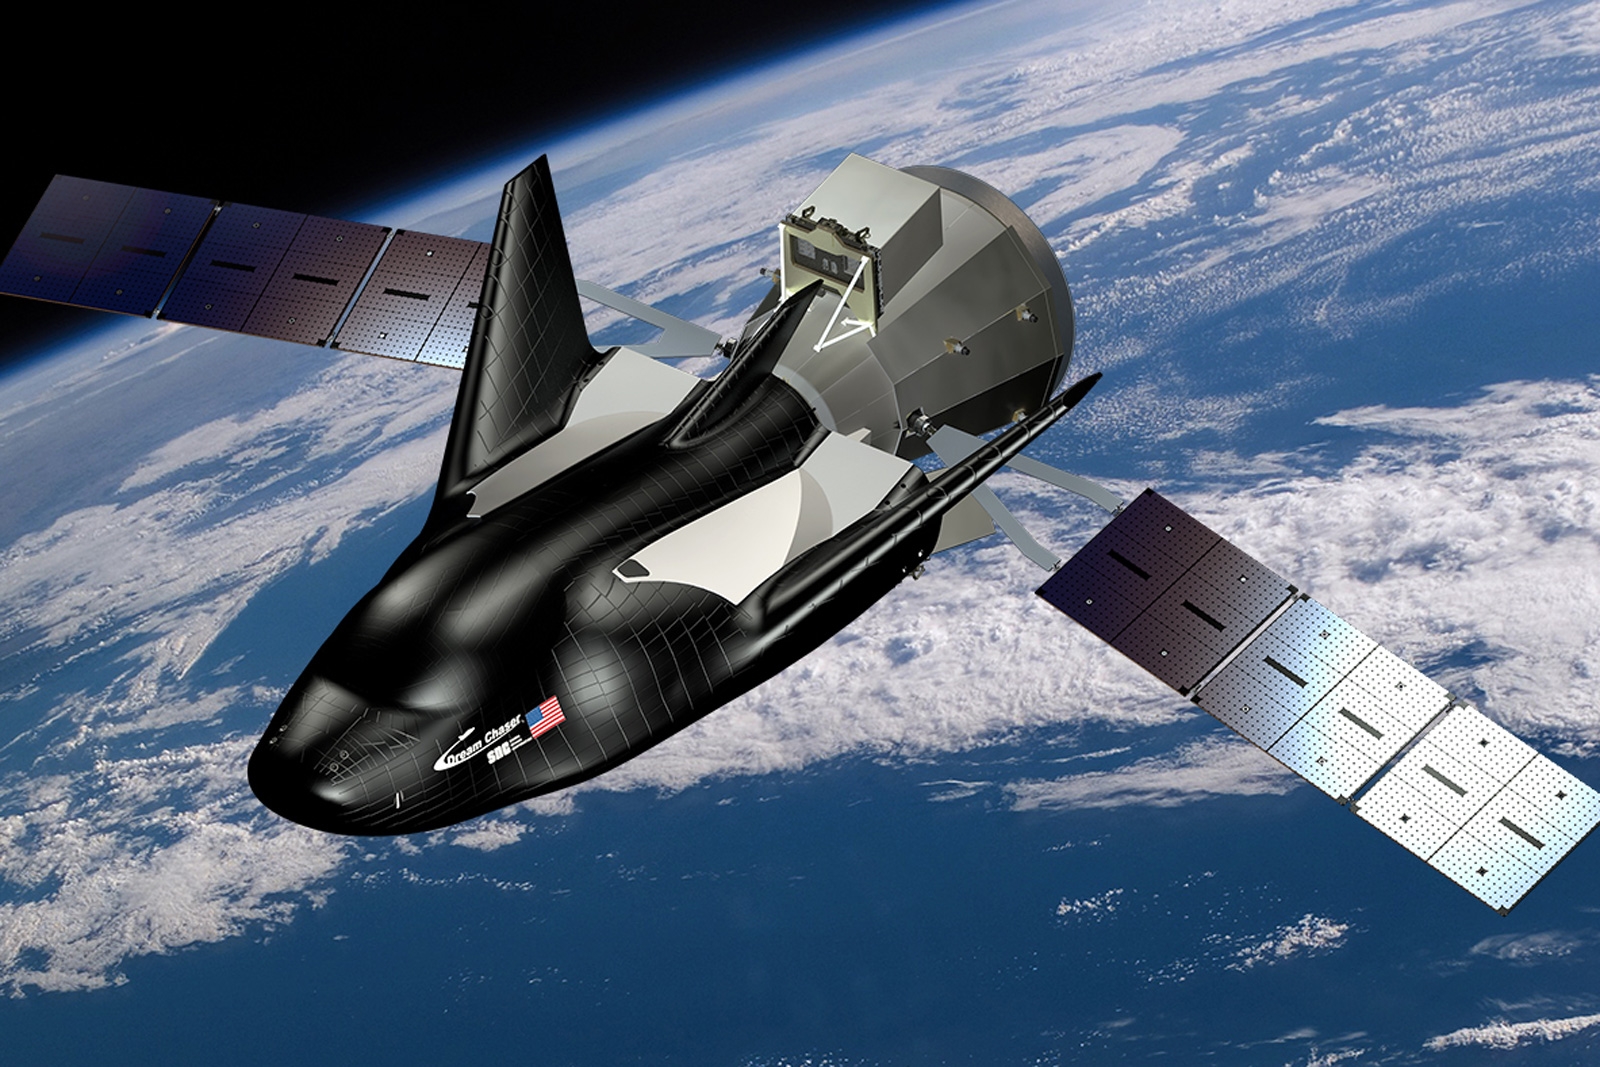 Dream Chaser's first ISS resupply mission launches in late 2020 | DeviceDaily.com